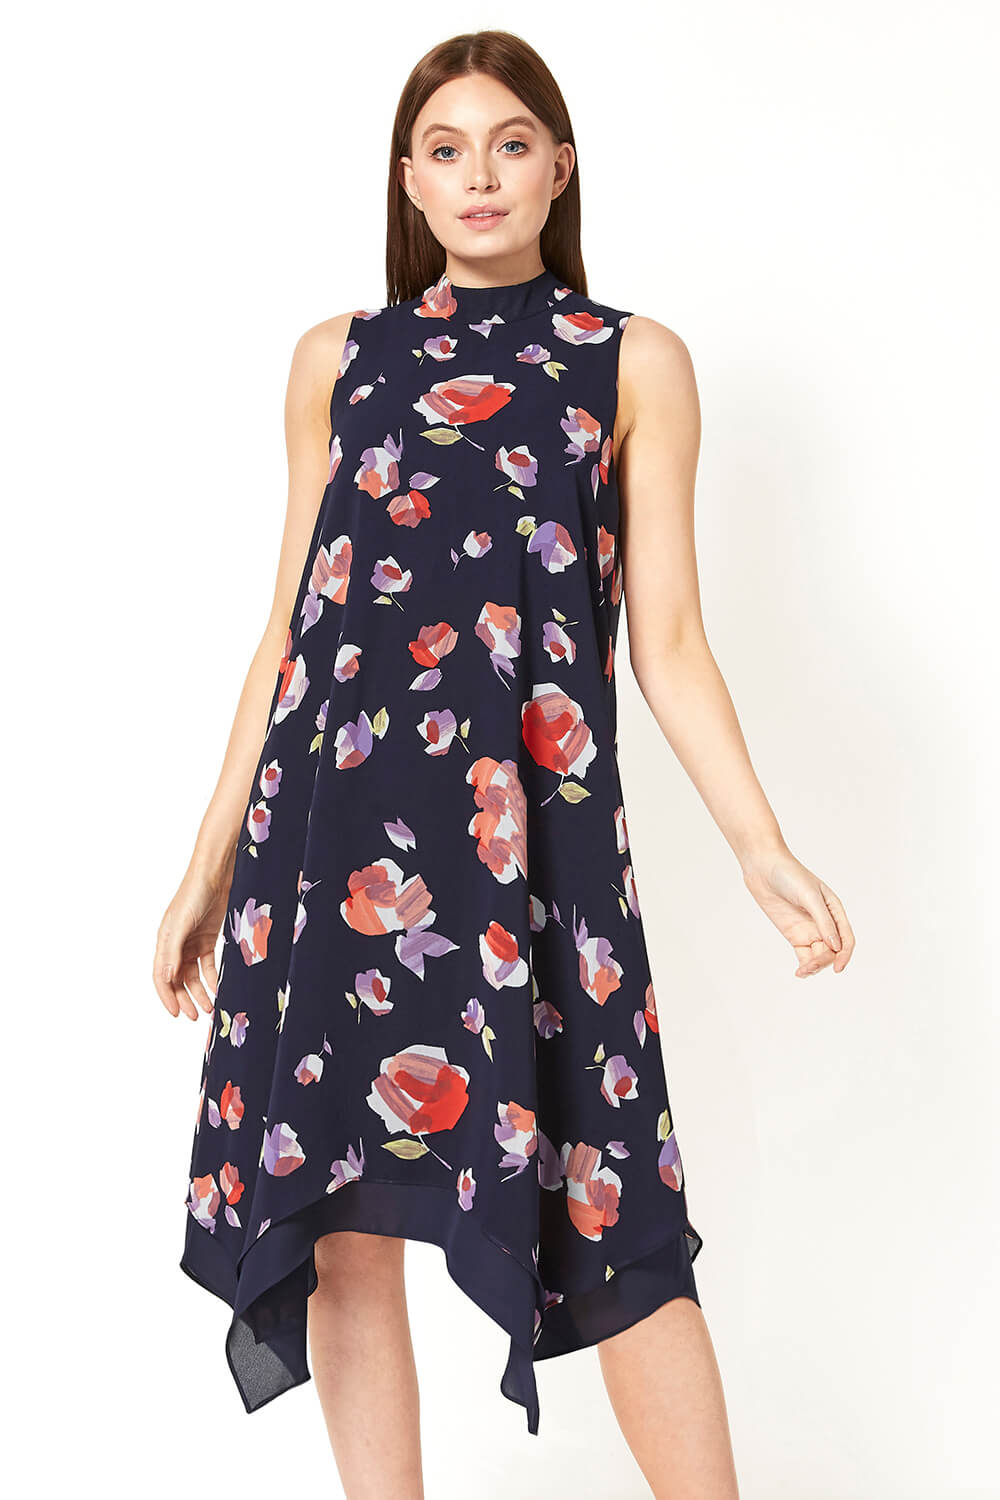 Navy  High Neck Floral Print Swing Dress, Image 2 of 5